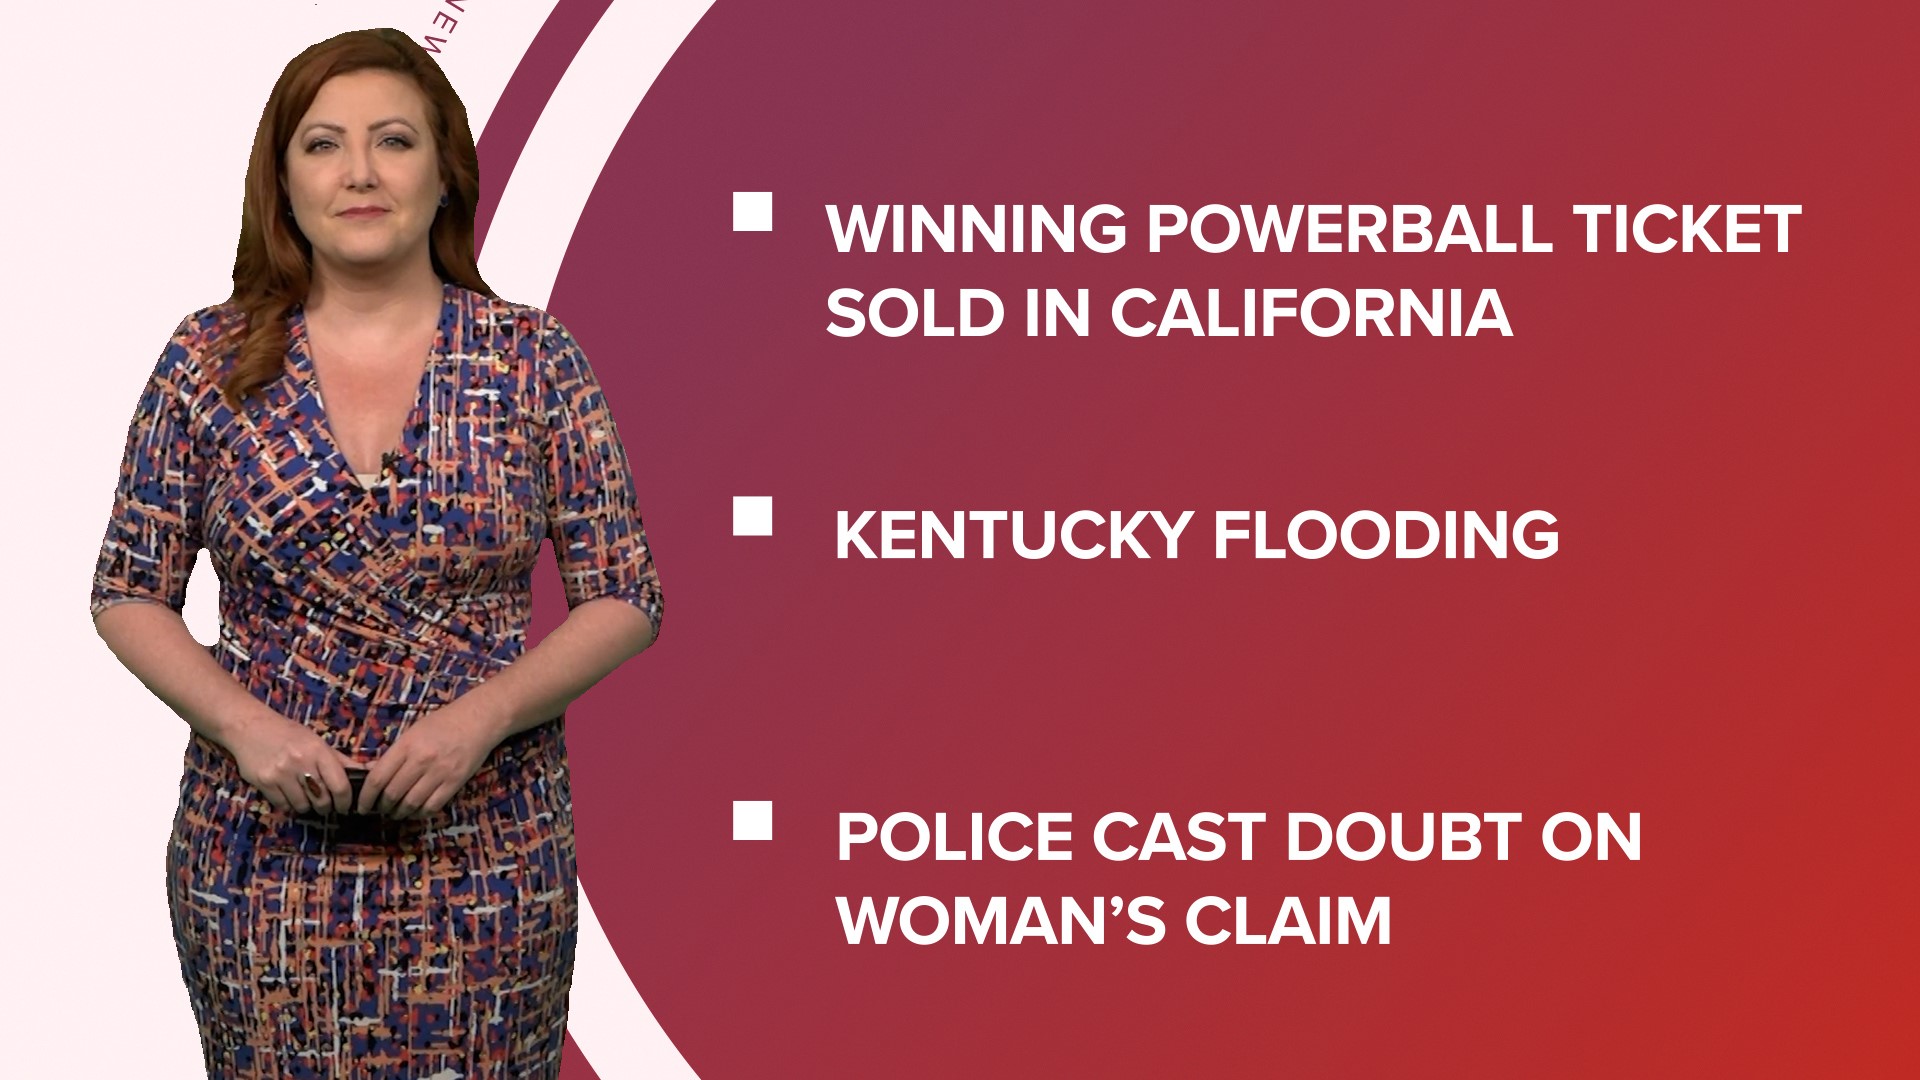 A look at what is happening in the news from a Powerball winner to more questions in the disappearance of AL woman to a shooting hours before start of World Cup.